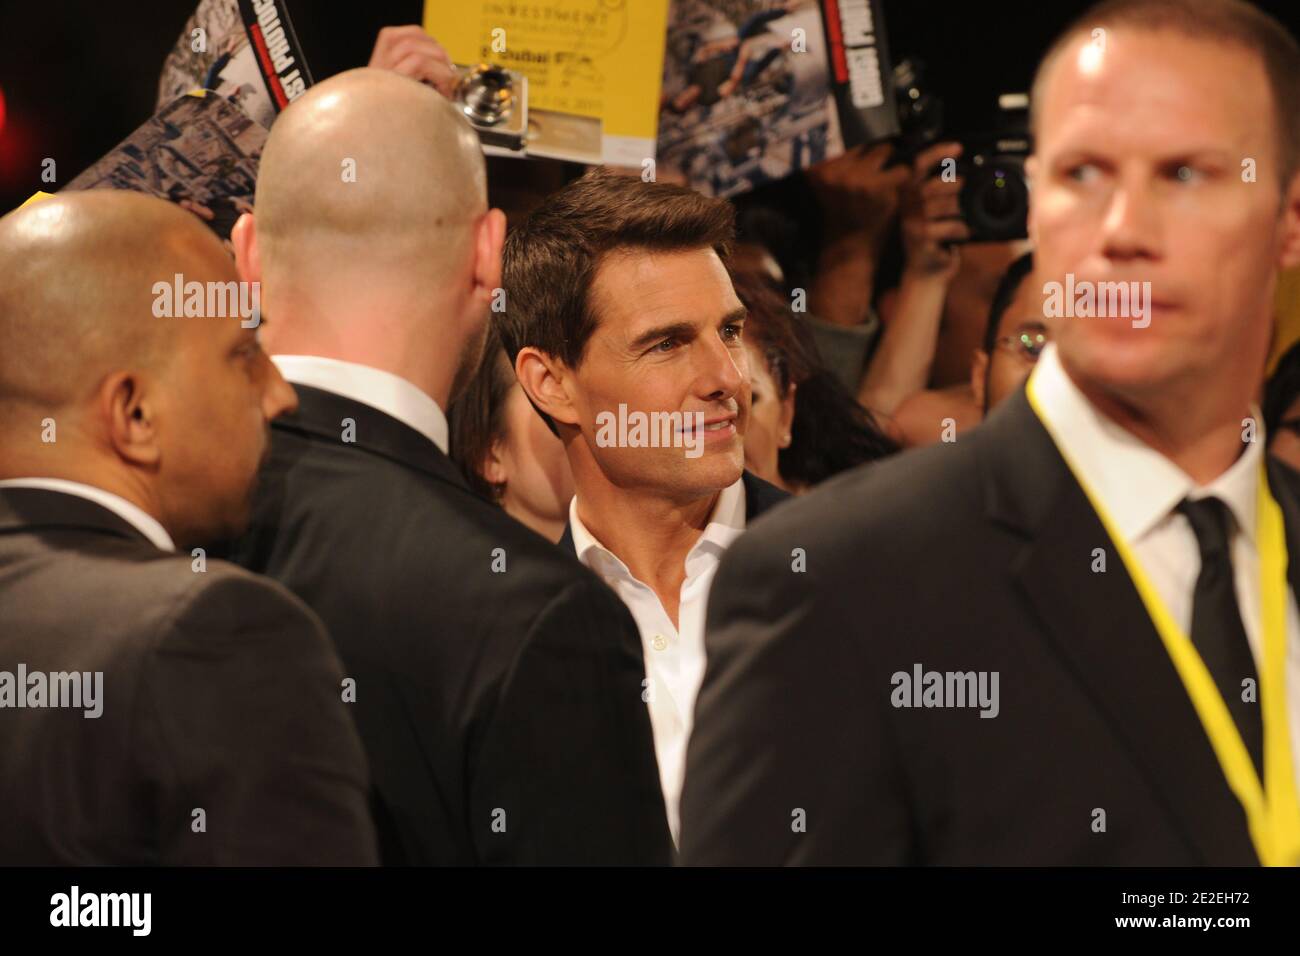 US actor Tom Cruise attending the 'Mission: Impossible - Ghost Protocol' Premiere during day one of the 8th Annual Dubai International Film Festival held at the Madinat Jumeriah Complex in Dubai, United Arab Emirates, on December 7, 2011. Photo by Ammar Abd Rabbo/ABACAPRESS.COM Stock Photo